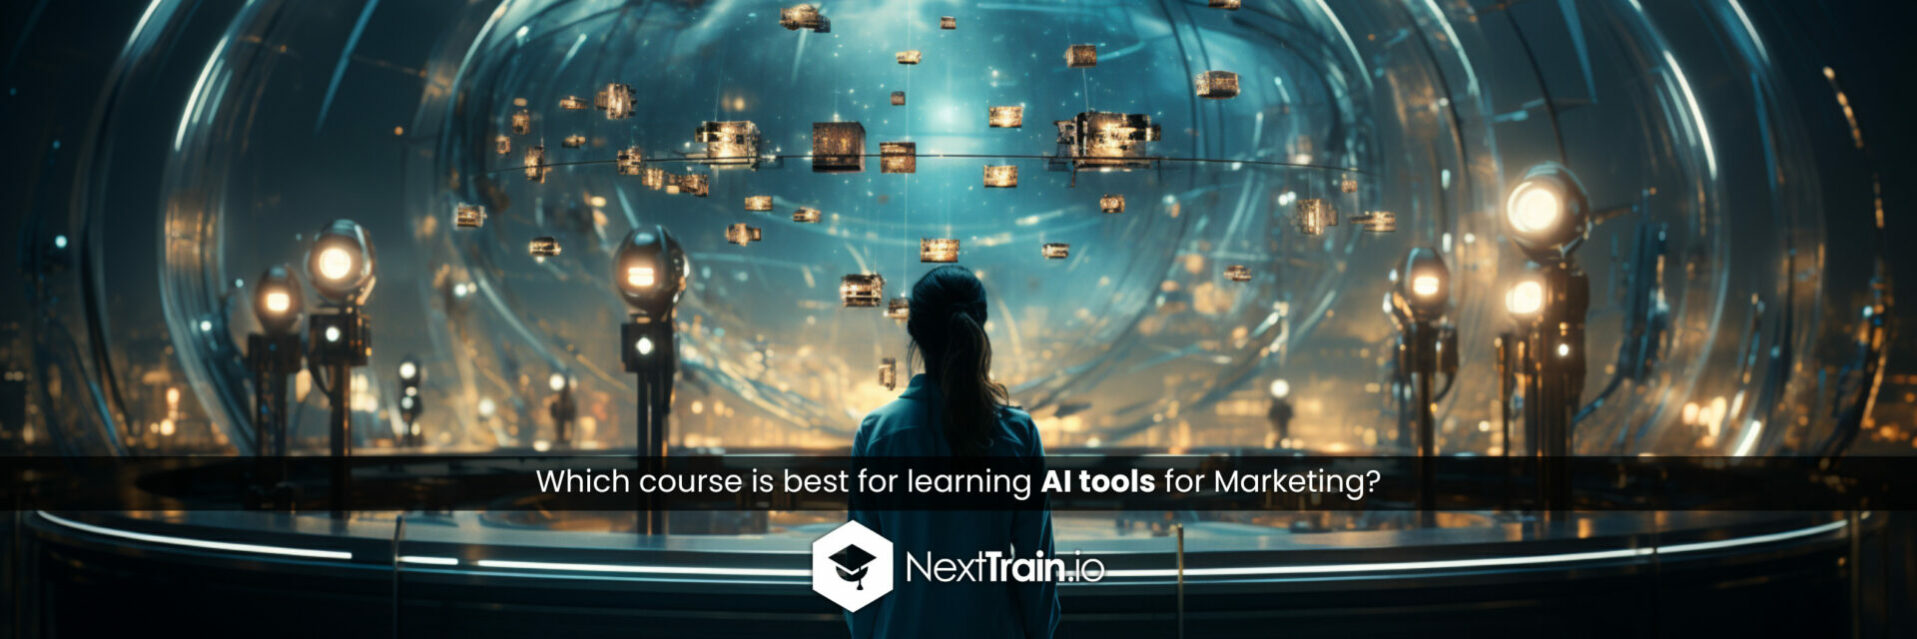 Which course is best for learning AI tools for Marketing?